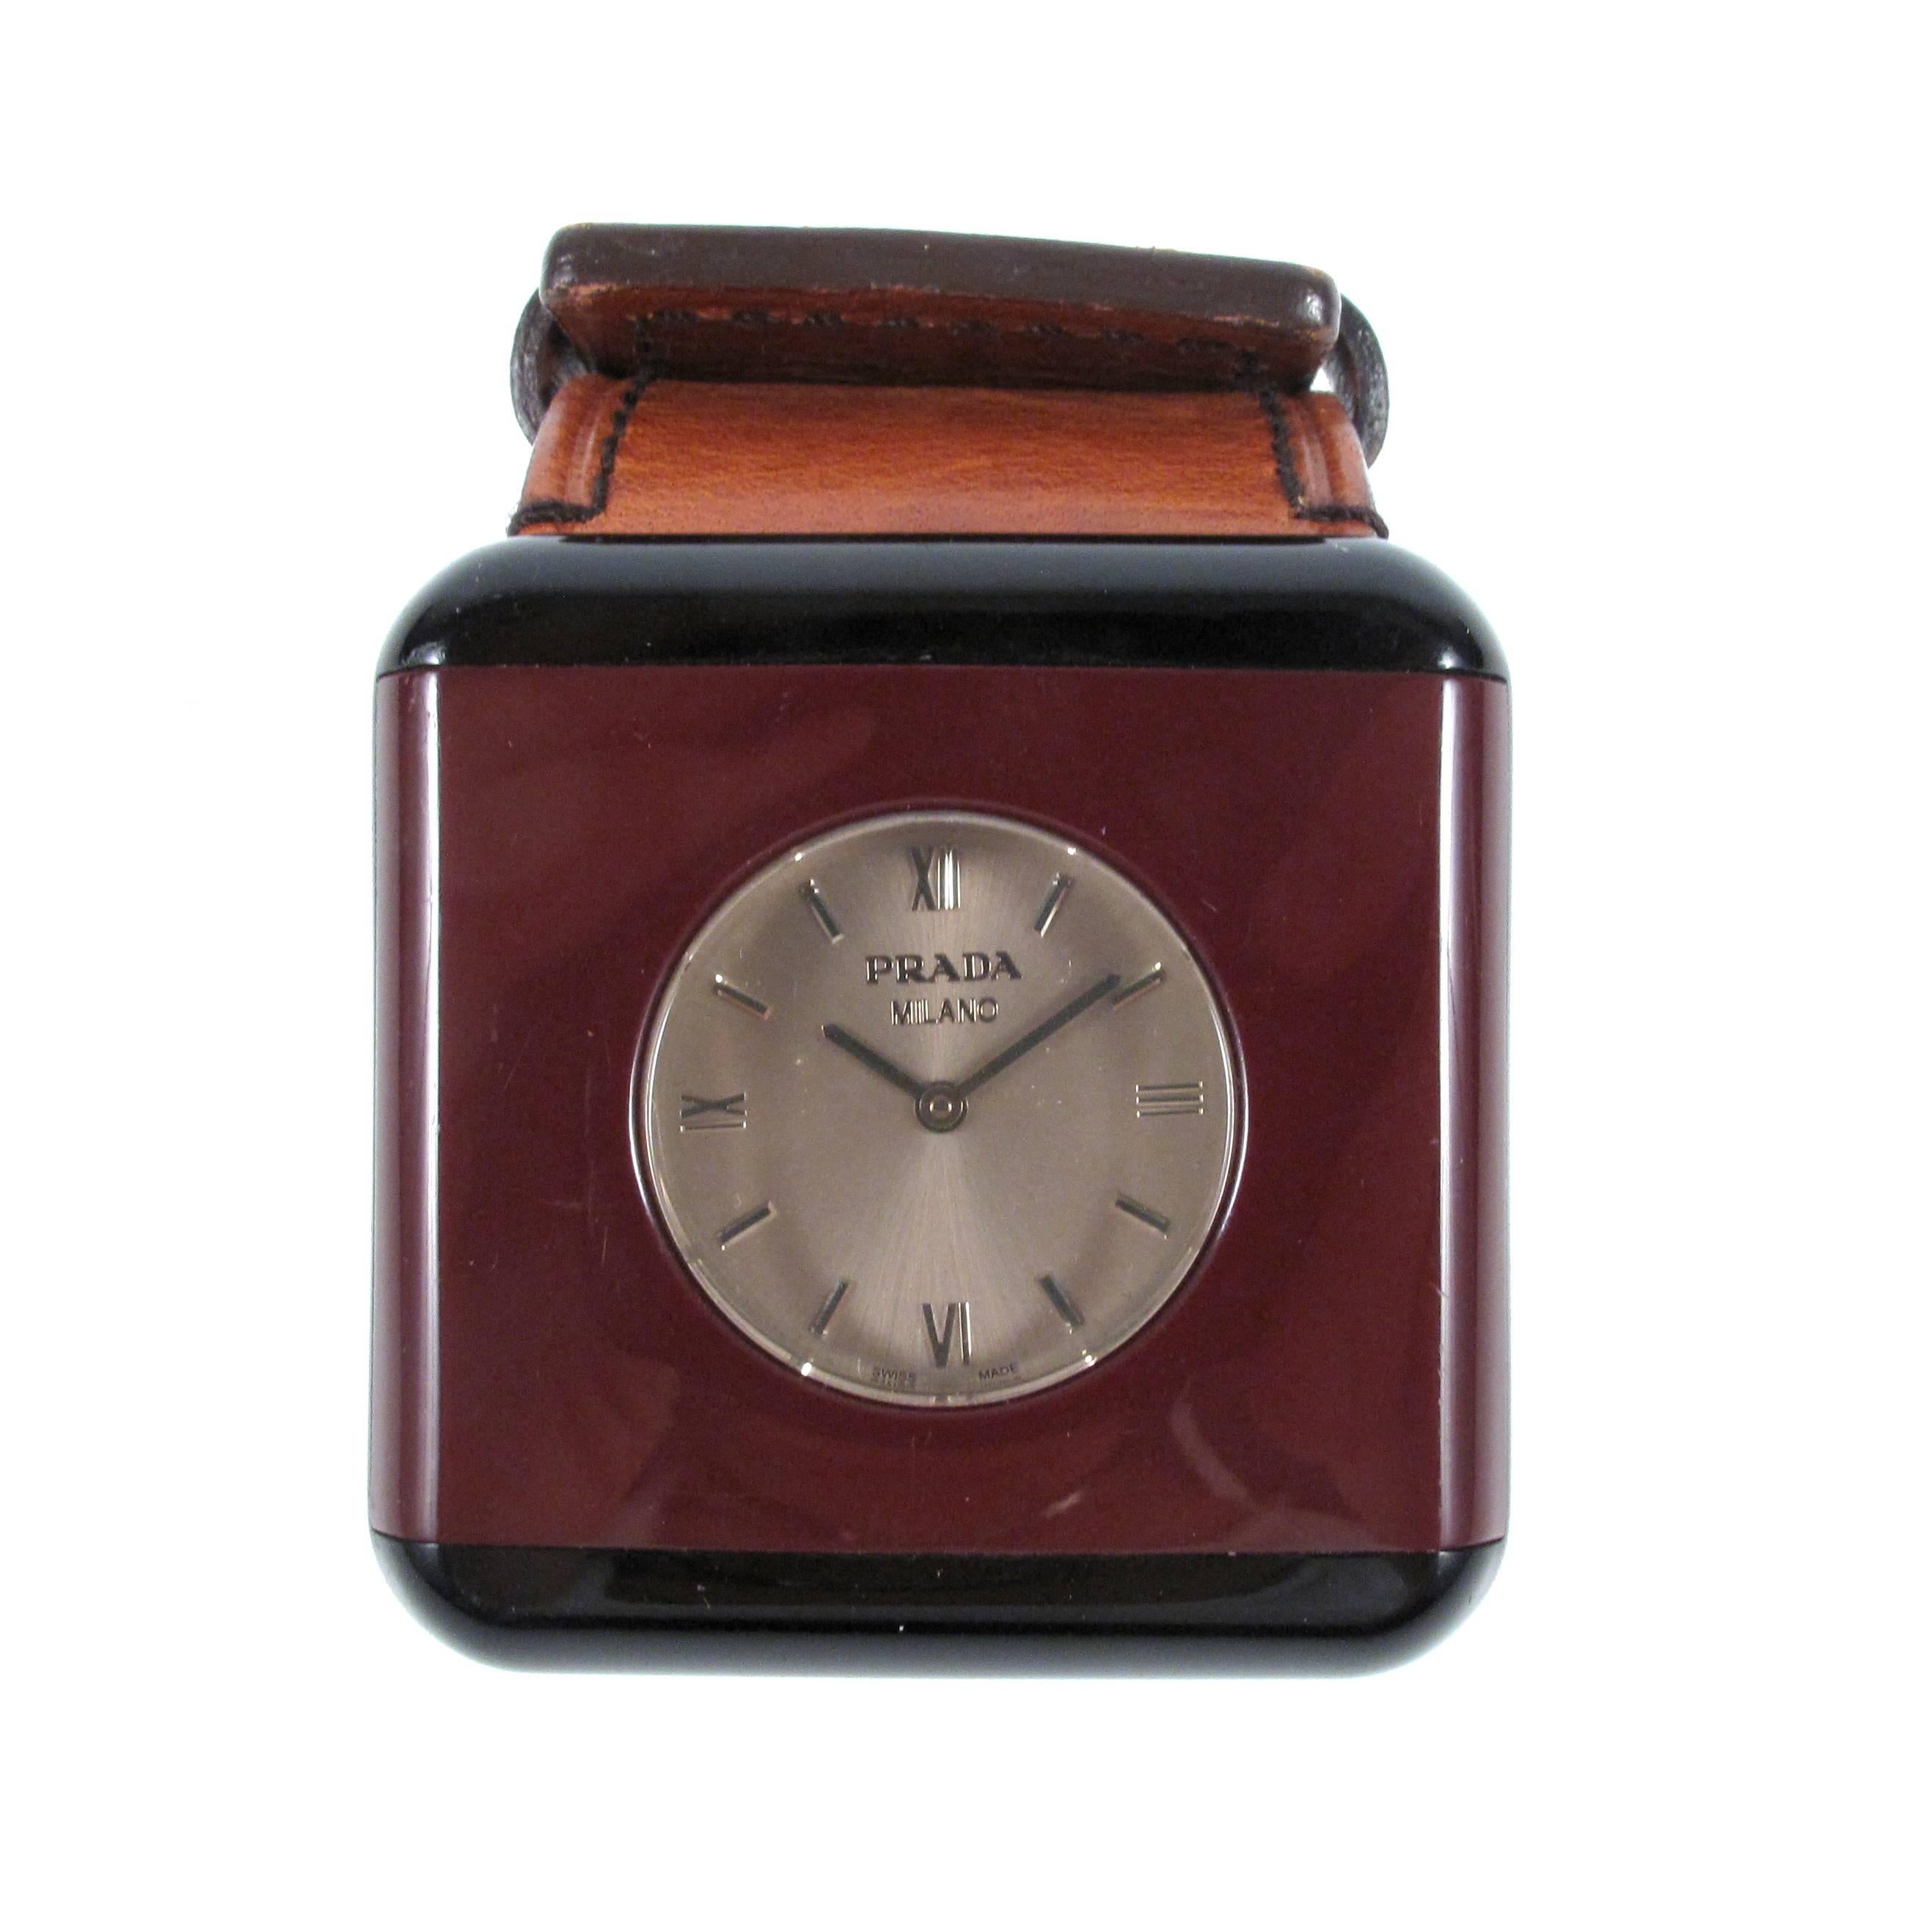 Prada - Watch Bracelet

Color: Maroon / Black / Brown

Material: Resin / Leather

------------------------------------------------------------

Details:

- leather band

- two tone watch face

- roman numerals

- stainless steel